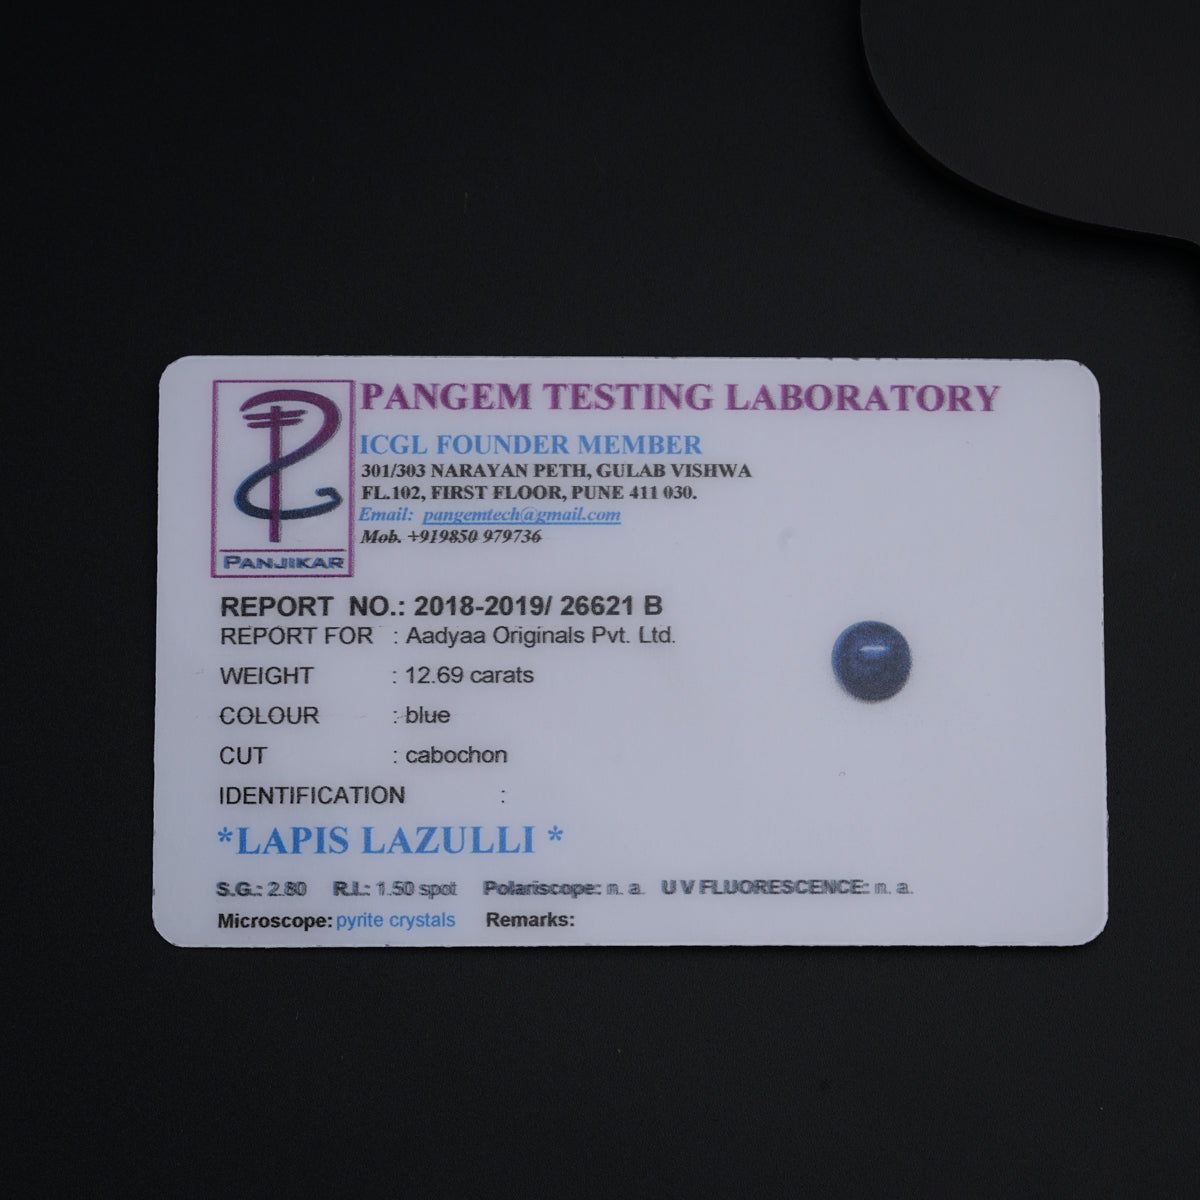 a label on a table that says pancem testing laboratory